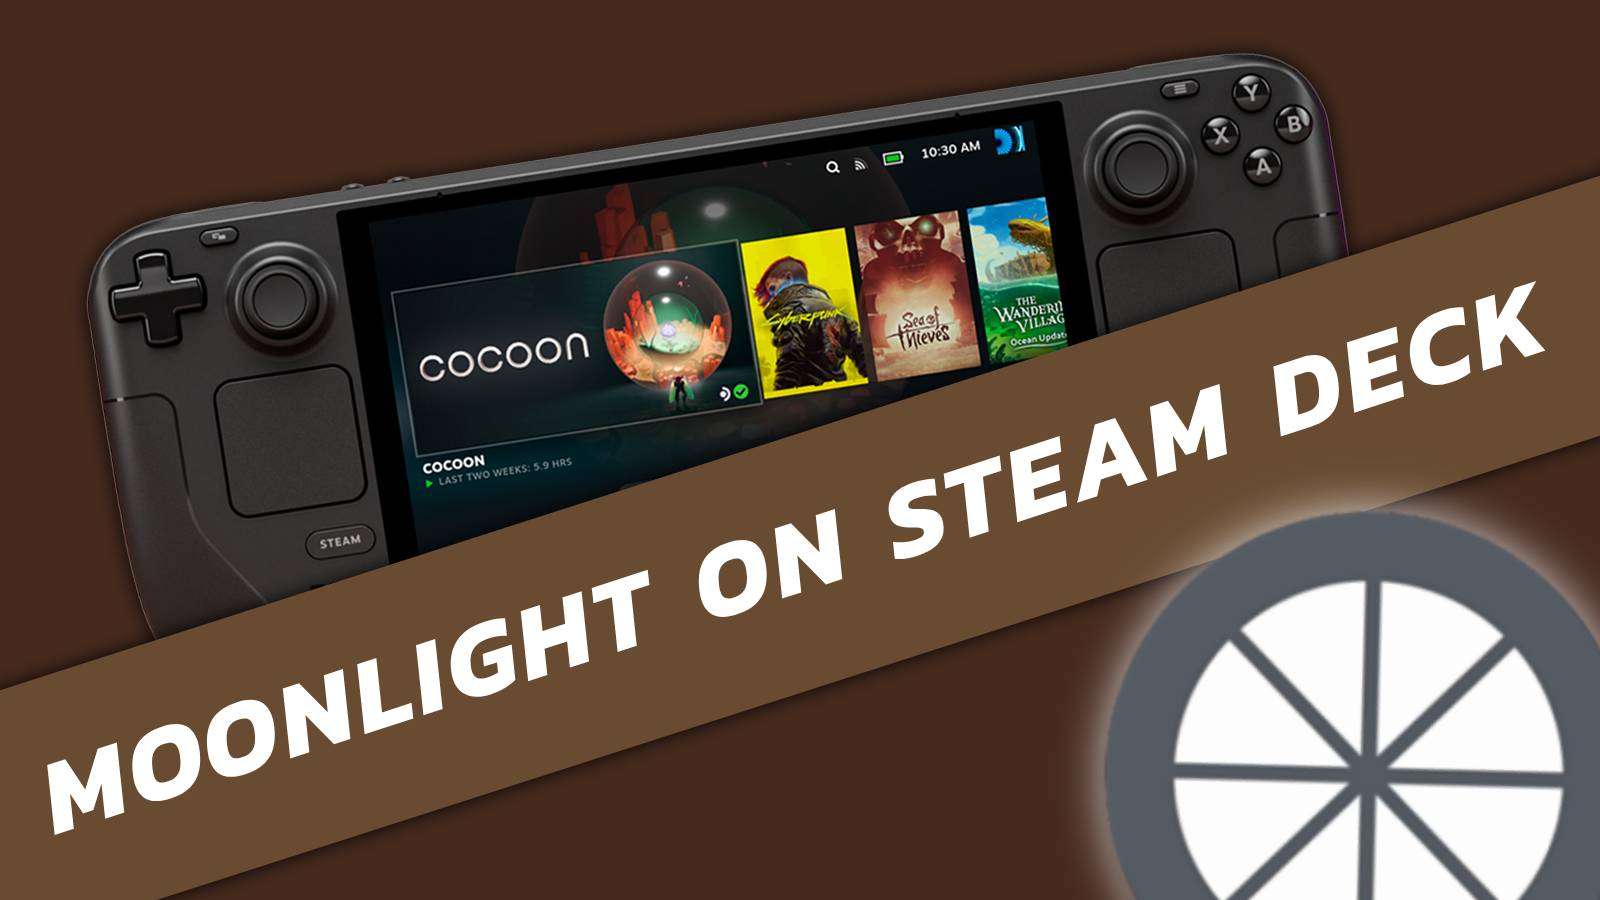 Image of a Steam Deck, with a banner across it, and the Moonlight logo in the bottom right corner.